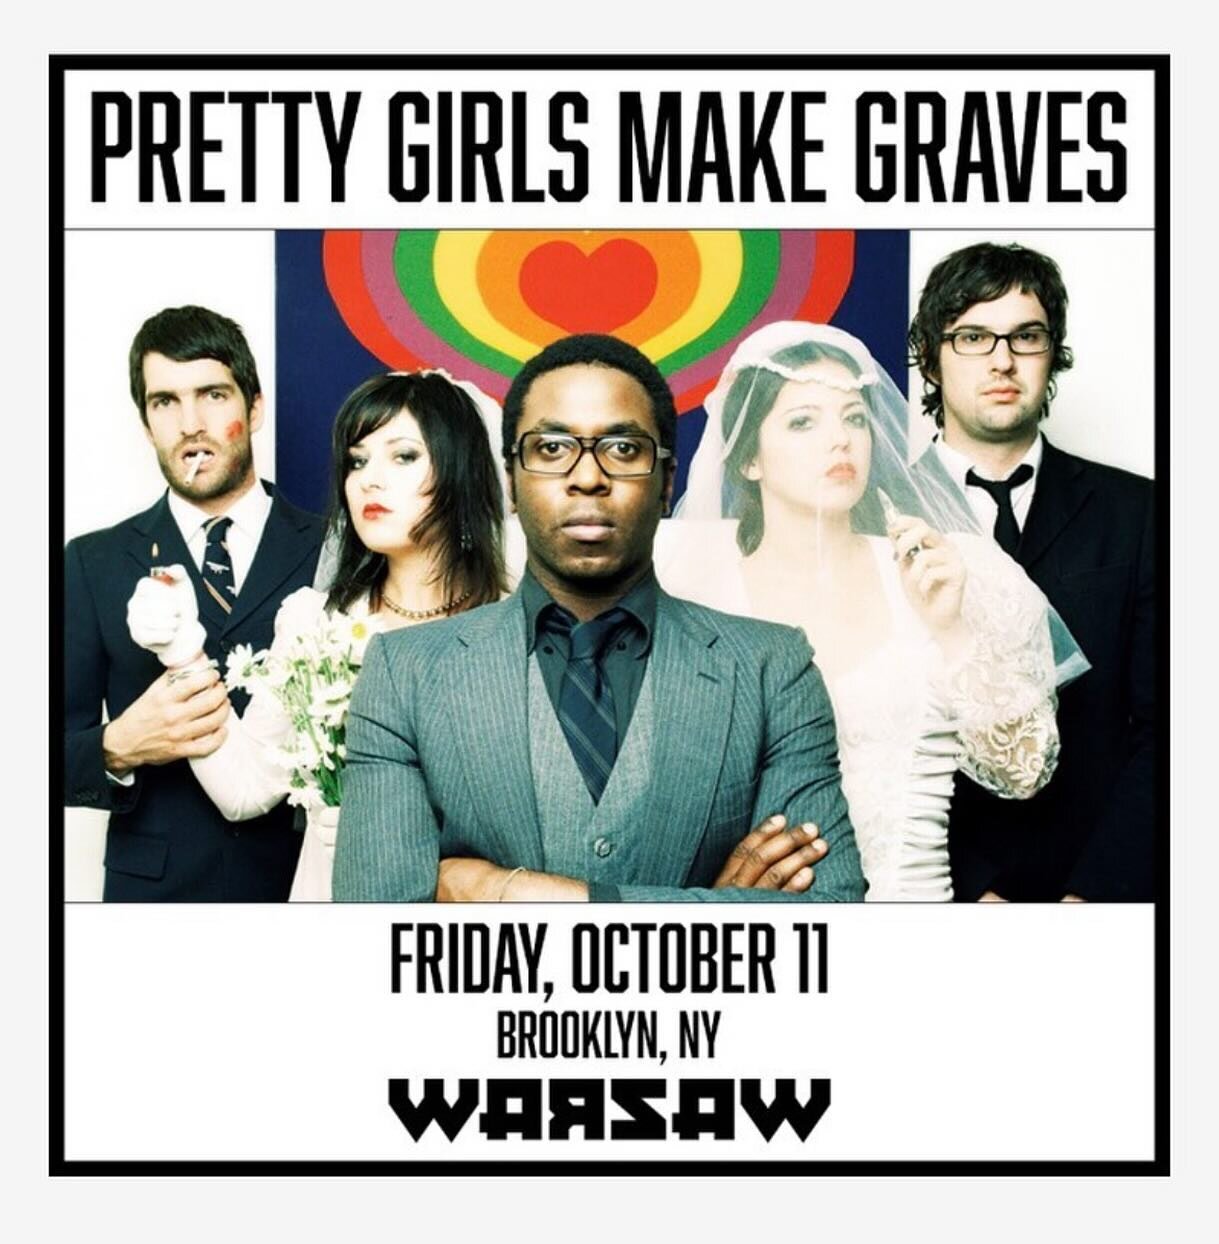 Just announced! Two shows for @prettygirlsmakegravesband, tickets on sale Friday!